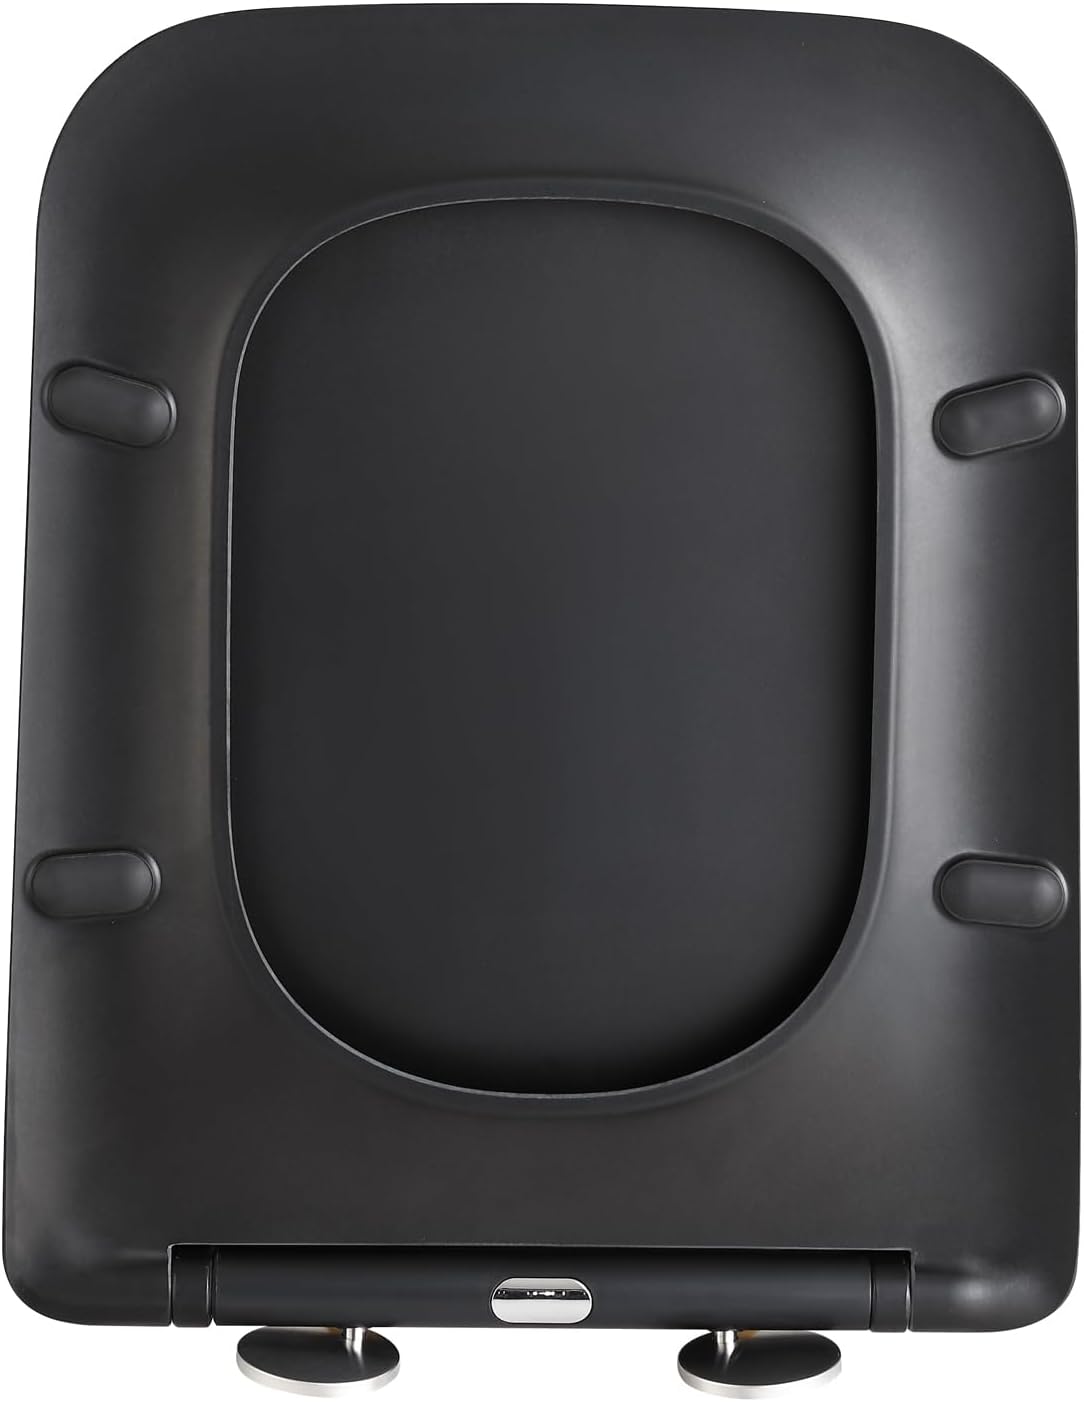 Soft Close Square Shape Black Toilet Seat, One Button Quick Release Toilet Seats for Easy Cleaning, Easy Installation Slim Toilet Seat